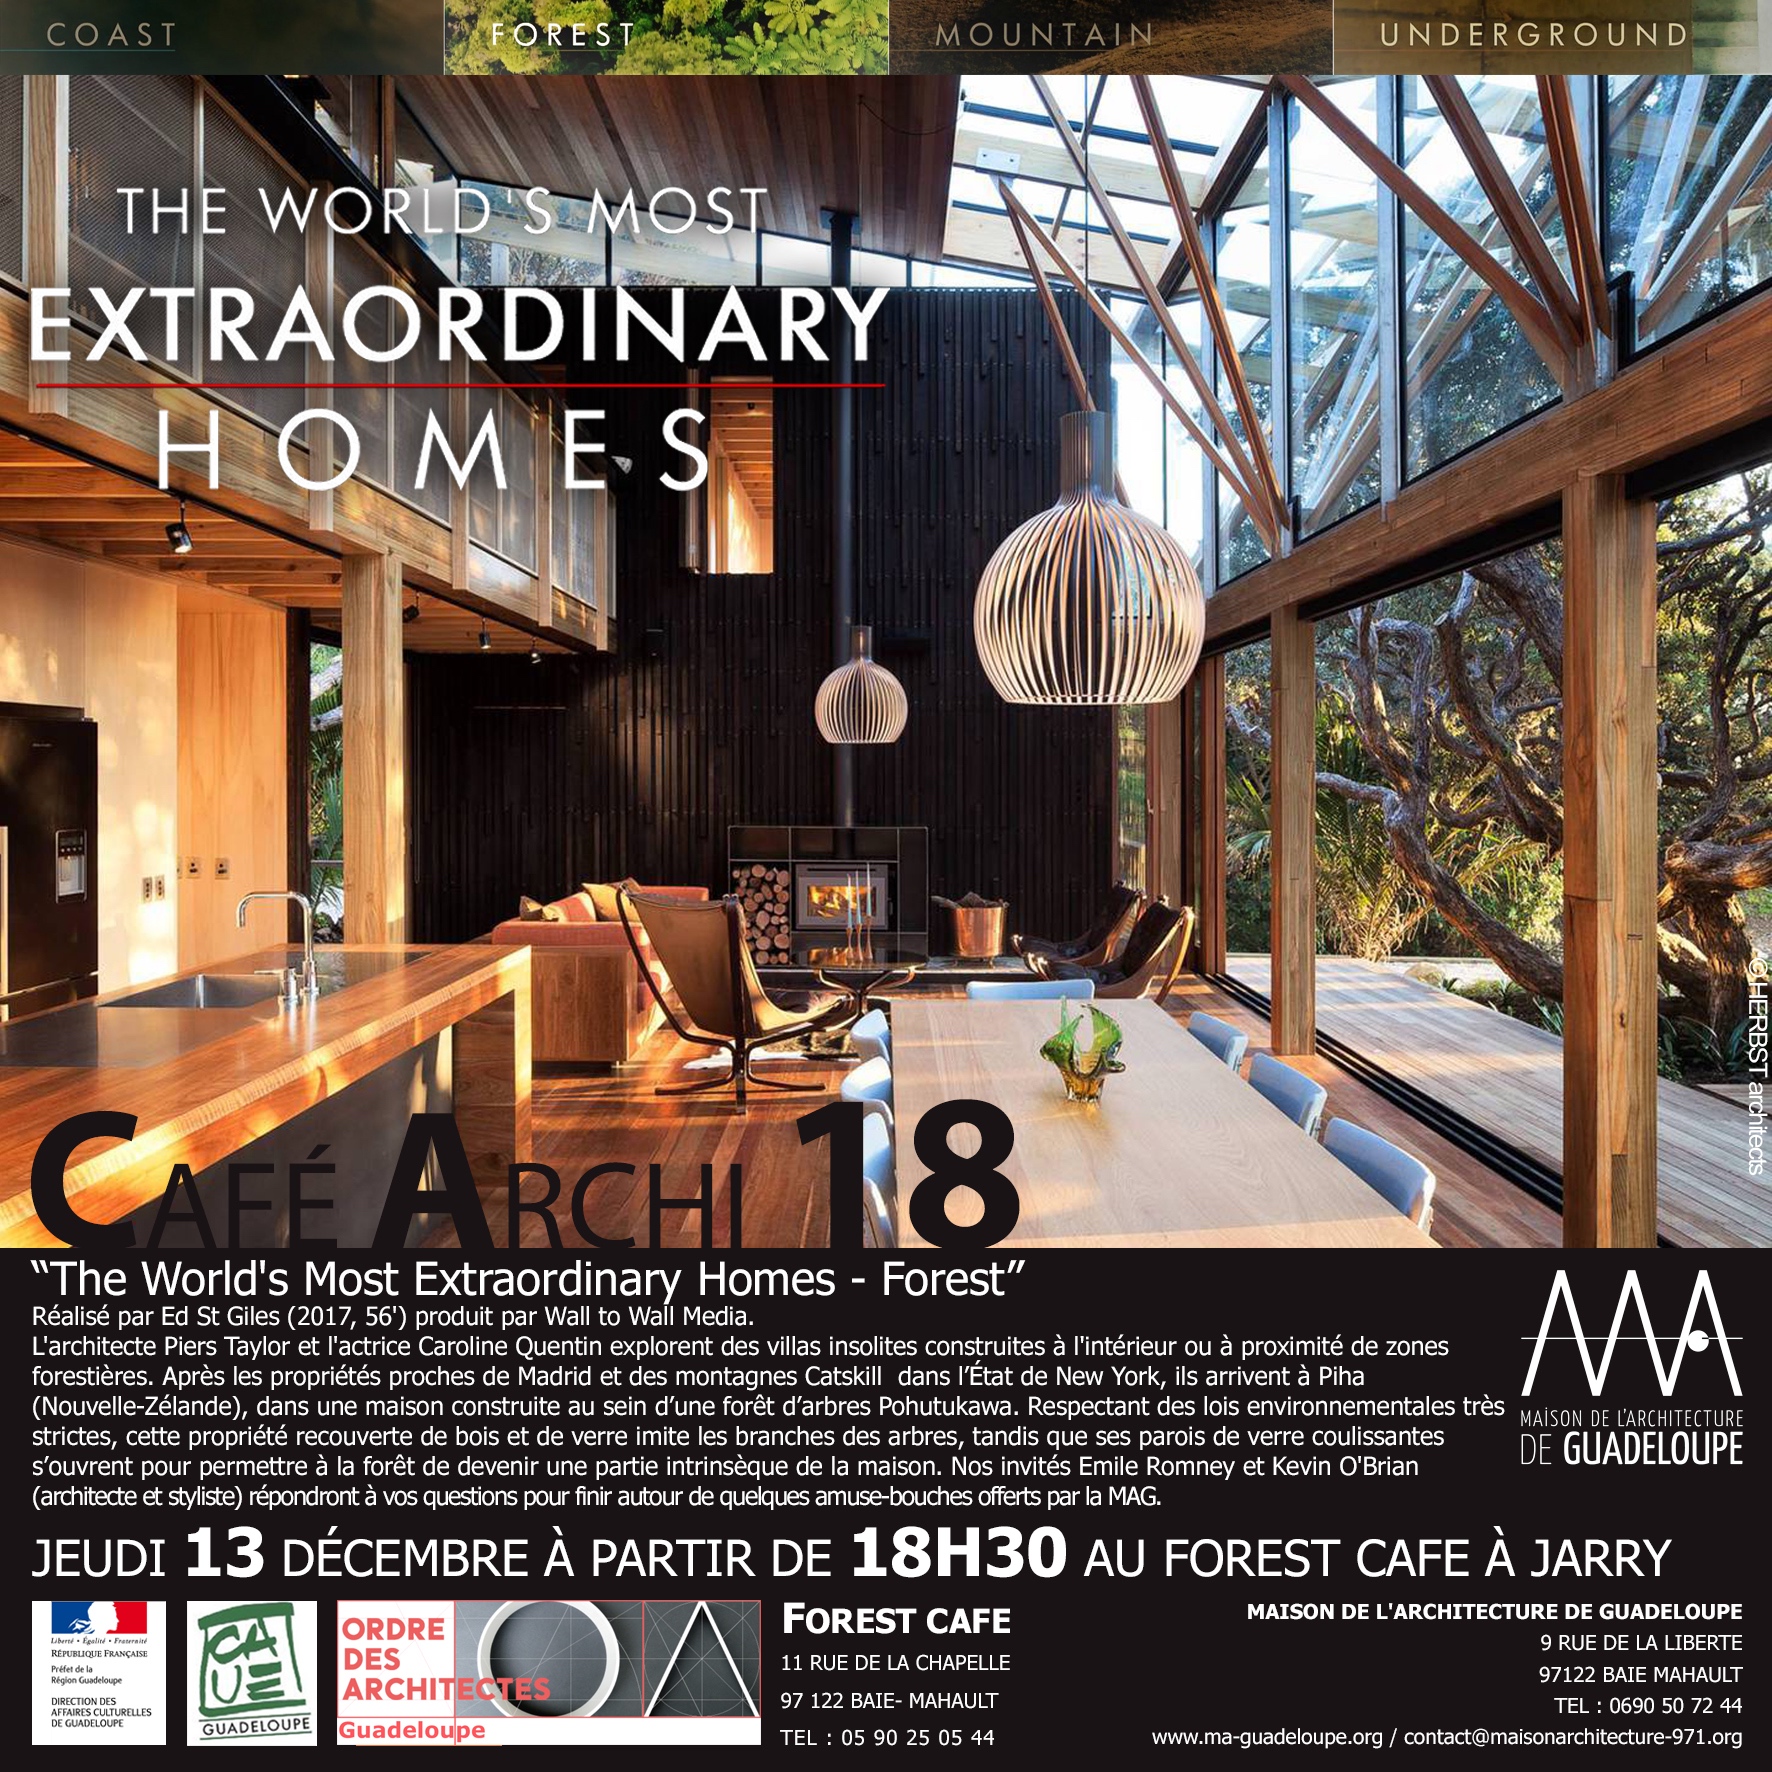 You are currently viewing Café Archi #18 – The World’s Most Extraordinary Homes – Forest